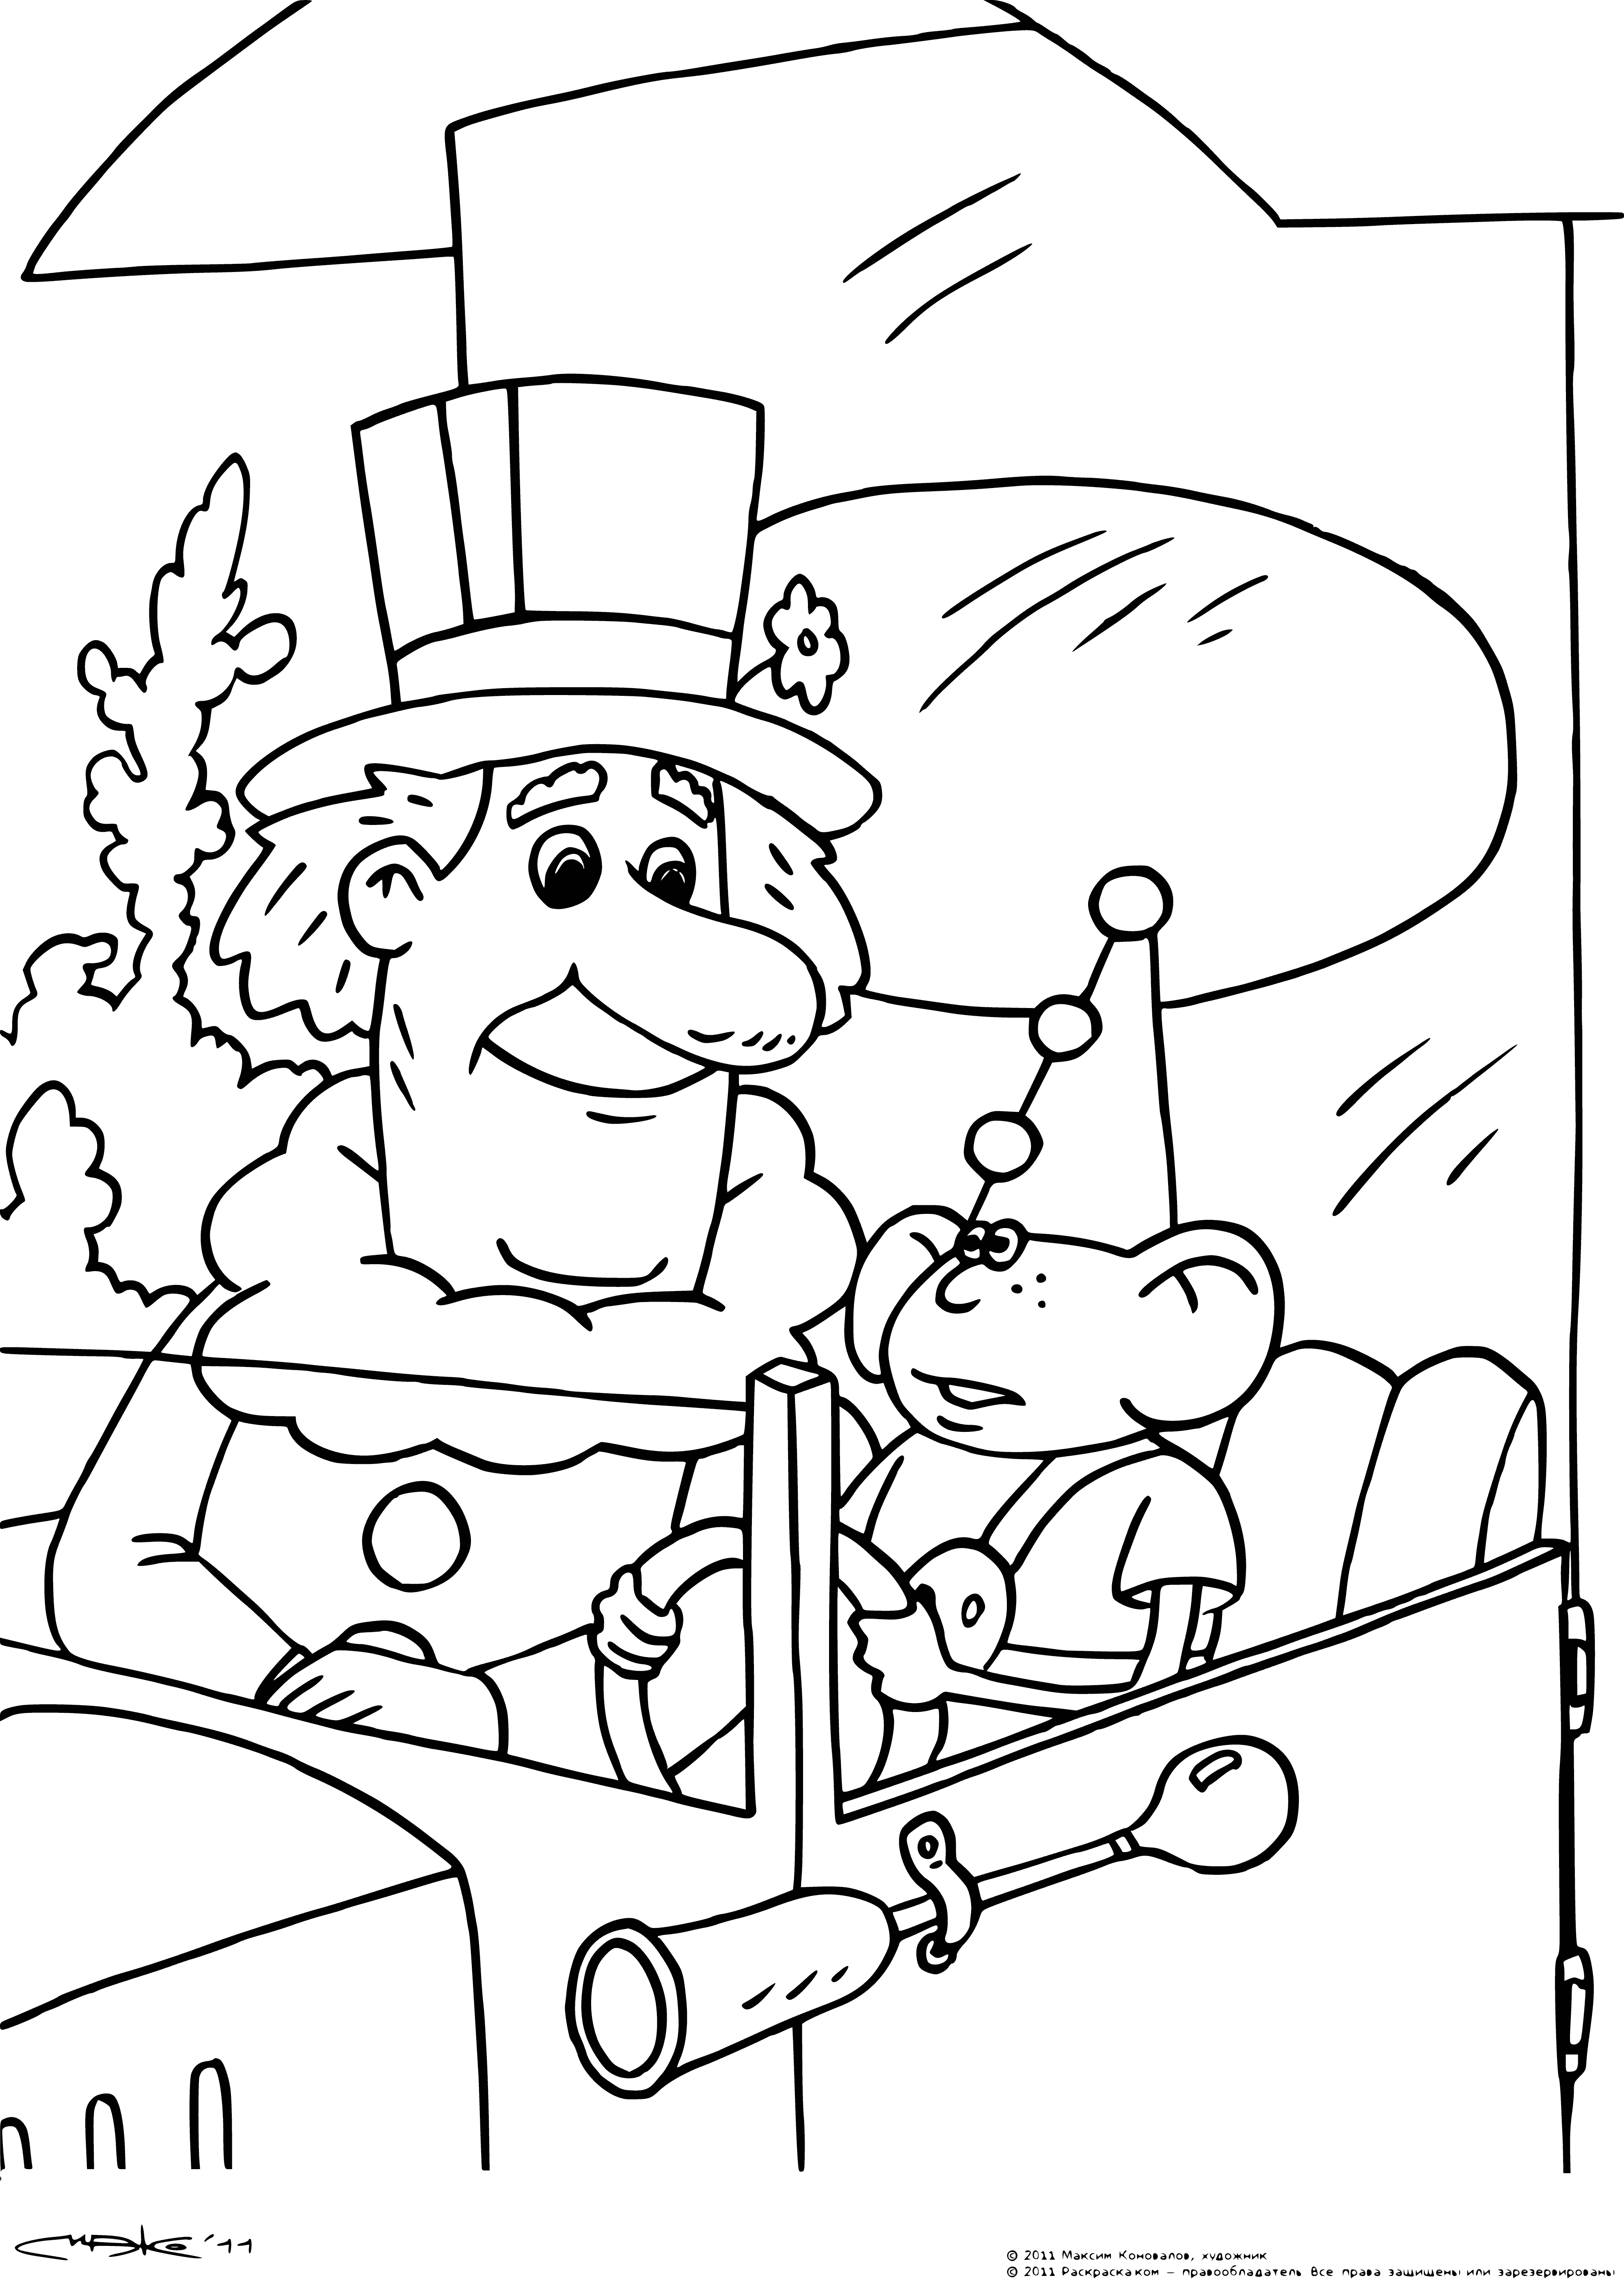 coloring page: Funtik, Mokus, and Bambino explore the jungle and have tons of fun together! #friendshipgoals